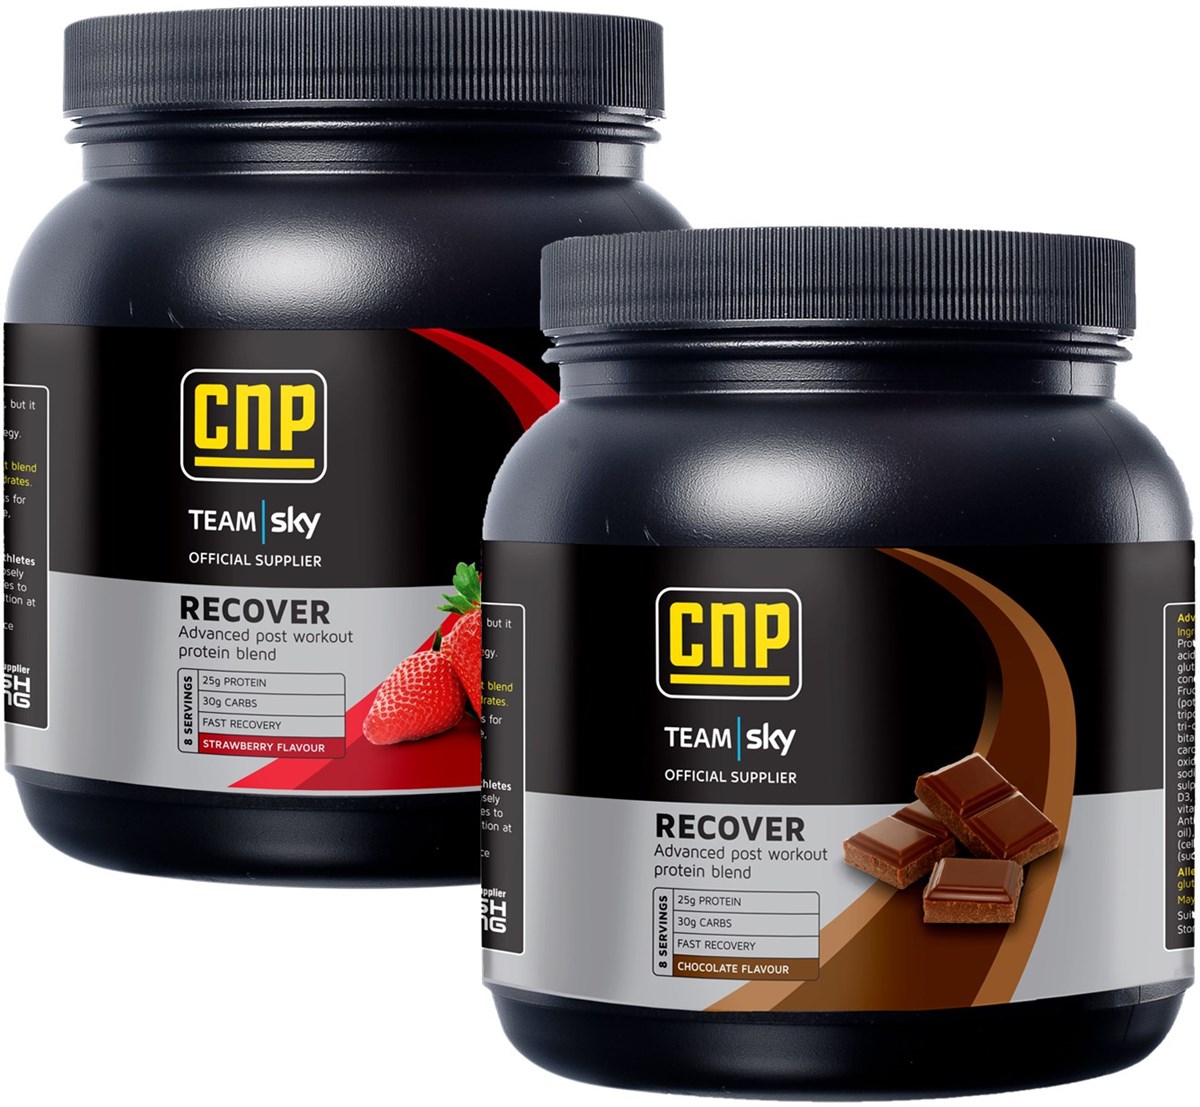 CNP Recover Post Workout Powder Drink - 1 x 520g Tub product image